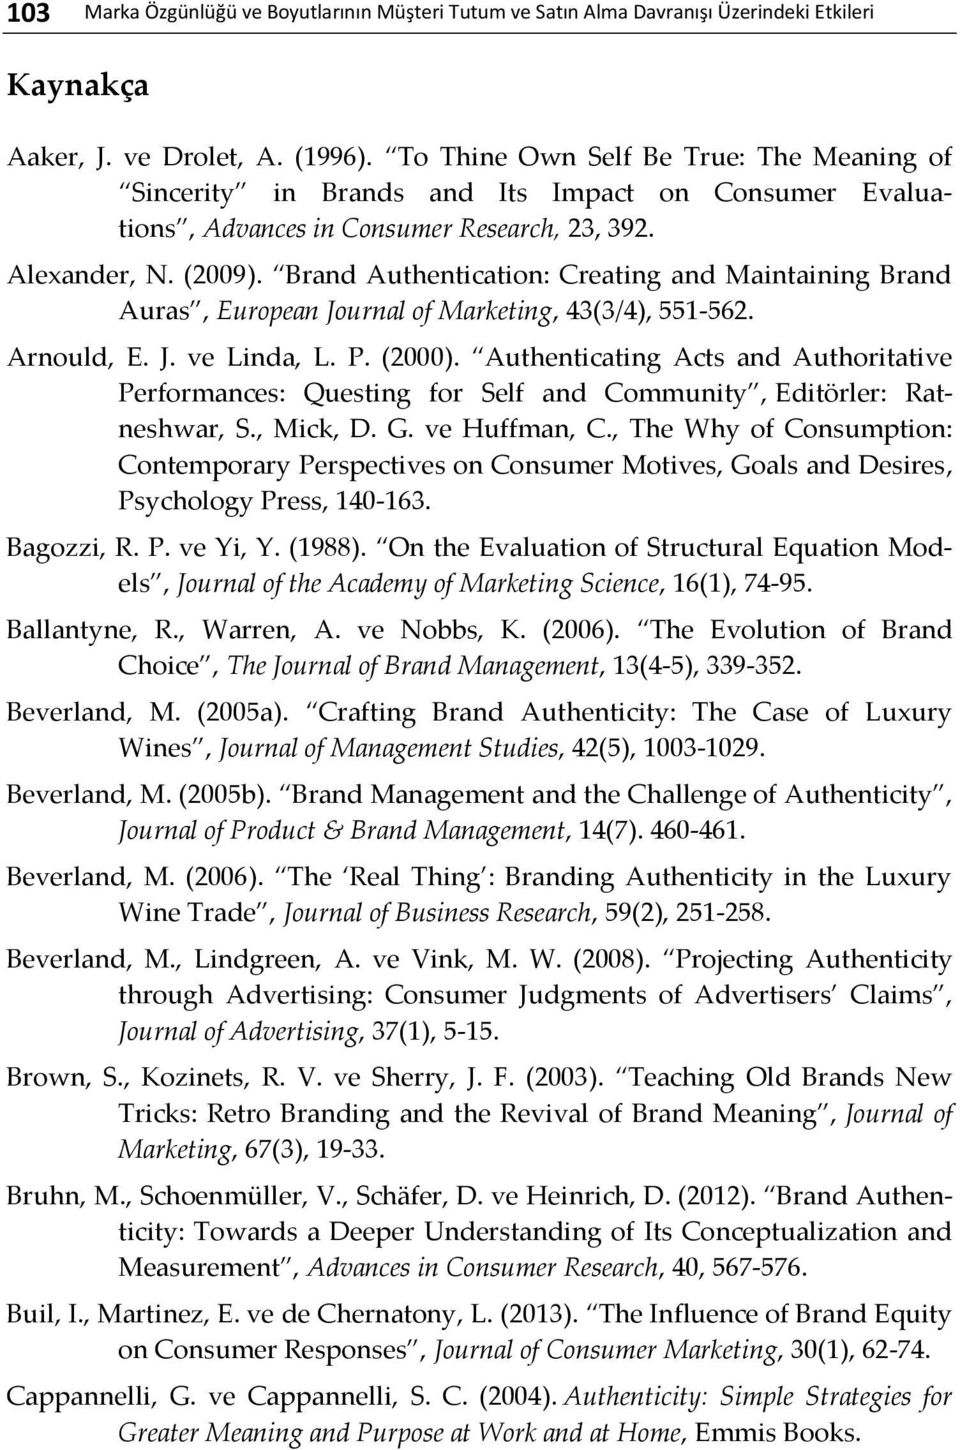 Brand Authentication: Creating and Maintaining Brand Auras, European Journal of Marketing, 43(3/4), 551-562. Arnould, E. J. ve Linda, L. P. (2000).